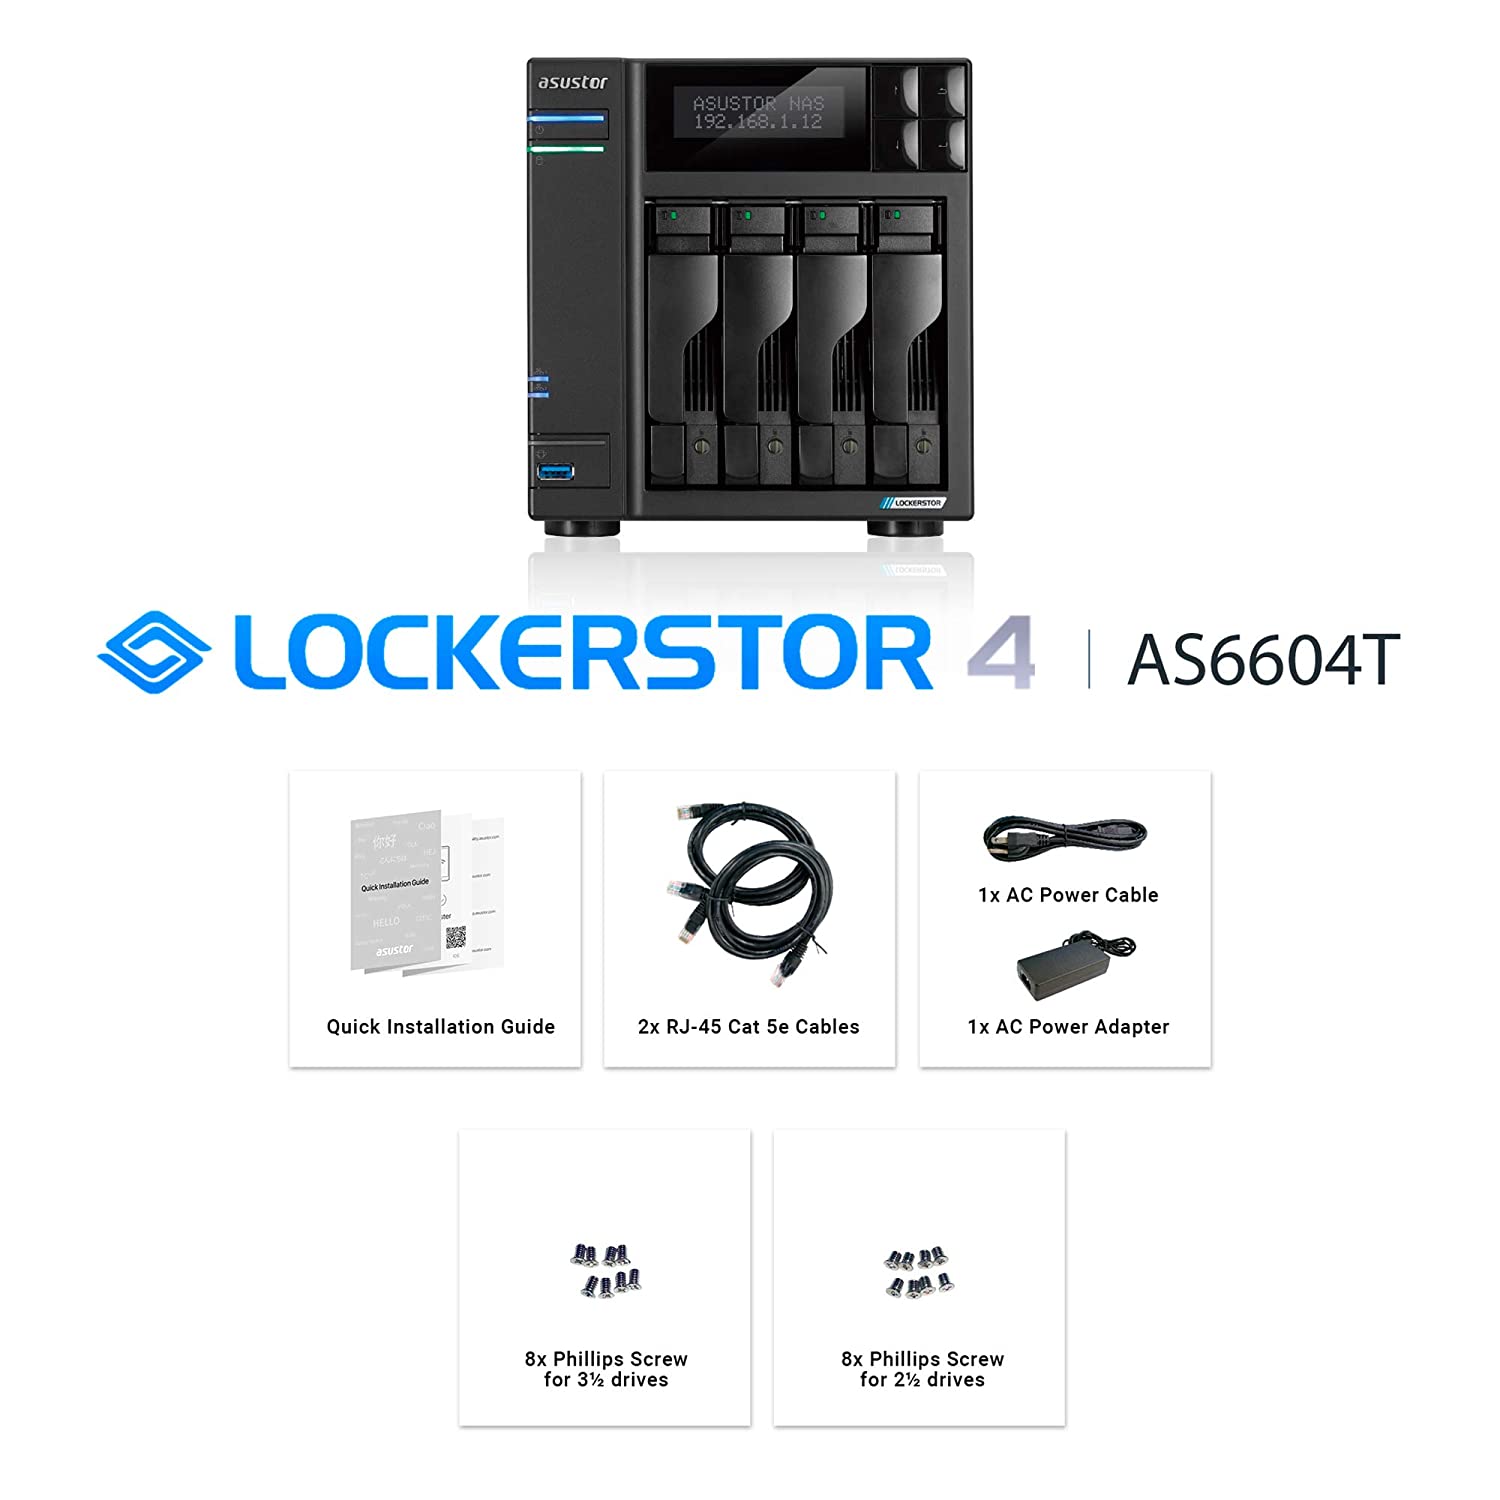 Two 2.5GbE Port AS6604T Asustor Lockerstor 4 Three 3.2USB Port Quad-Core Network Attached Storage 4 Bay Diskless NAS 4GB RAM DDR4 HDMI 2.0 Output 